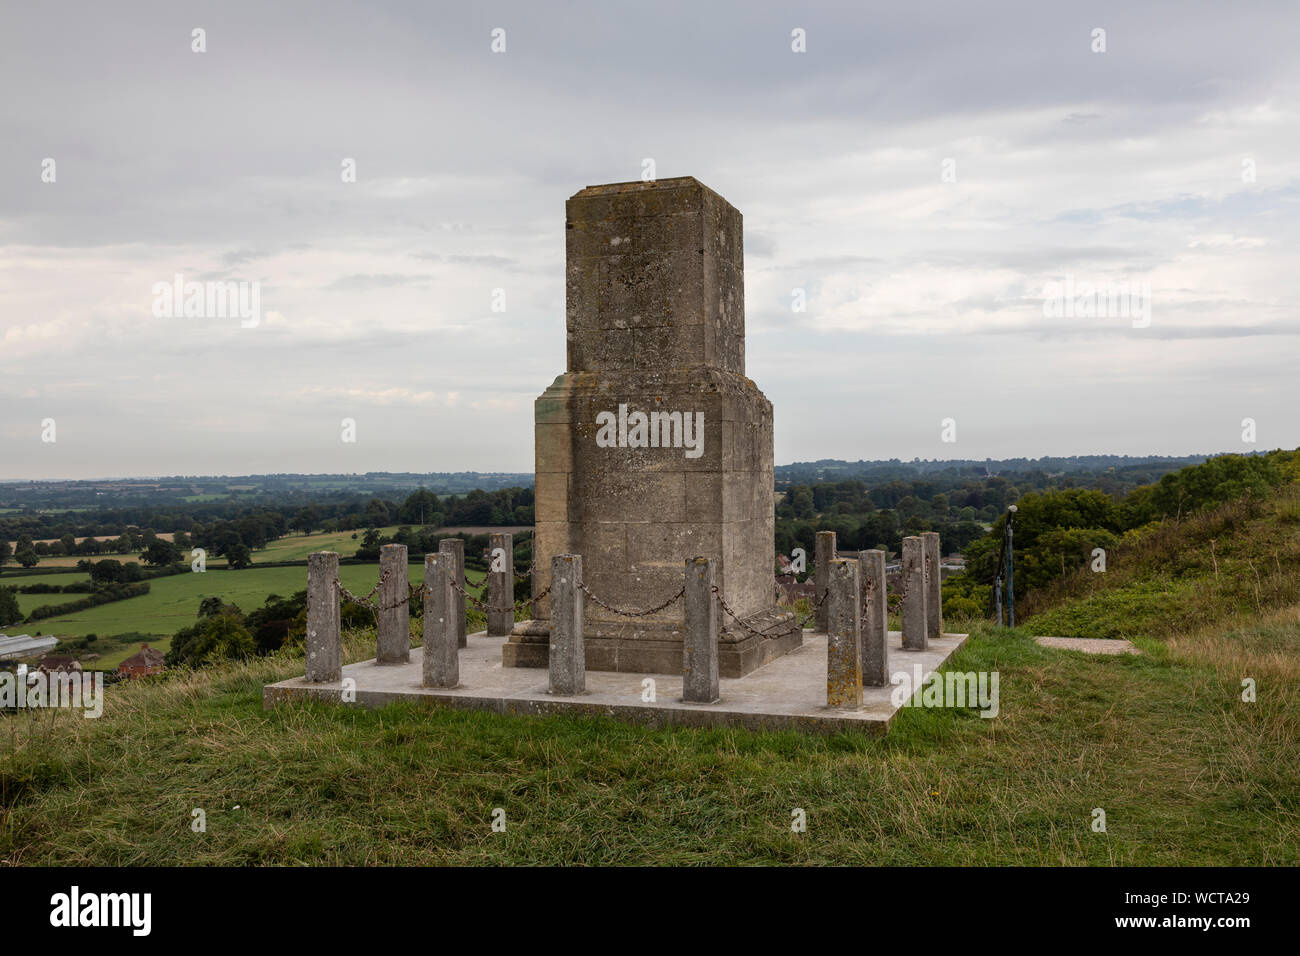 Memorial to the 43rd (Wessex) Infantry Division at the top of Castle Hill / Mere Castle, Mere, Wiltshire, England, UK Stock Photo